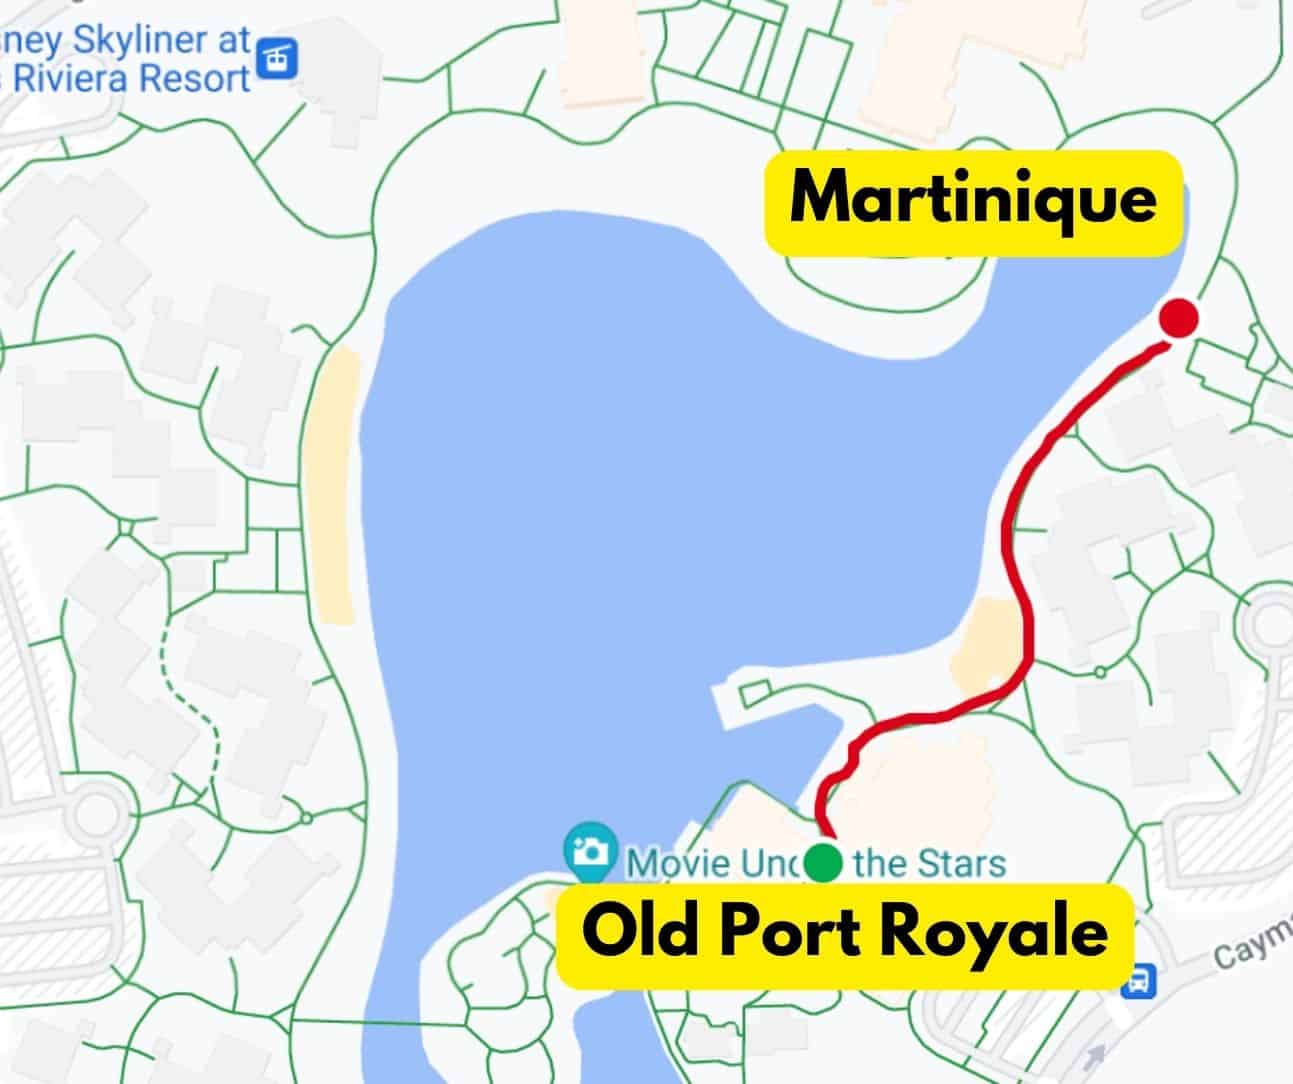 Walking Distance from Old Port Royale to Martinique 